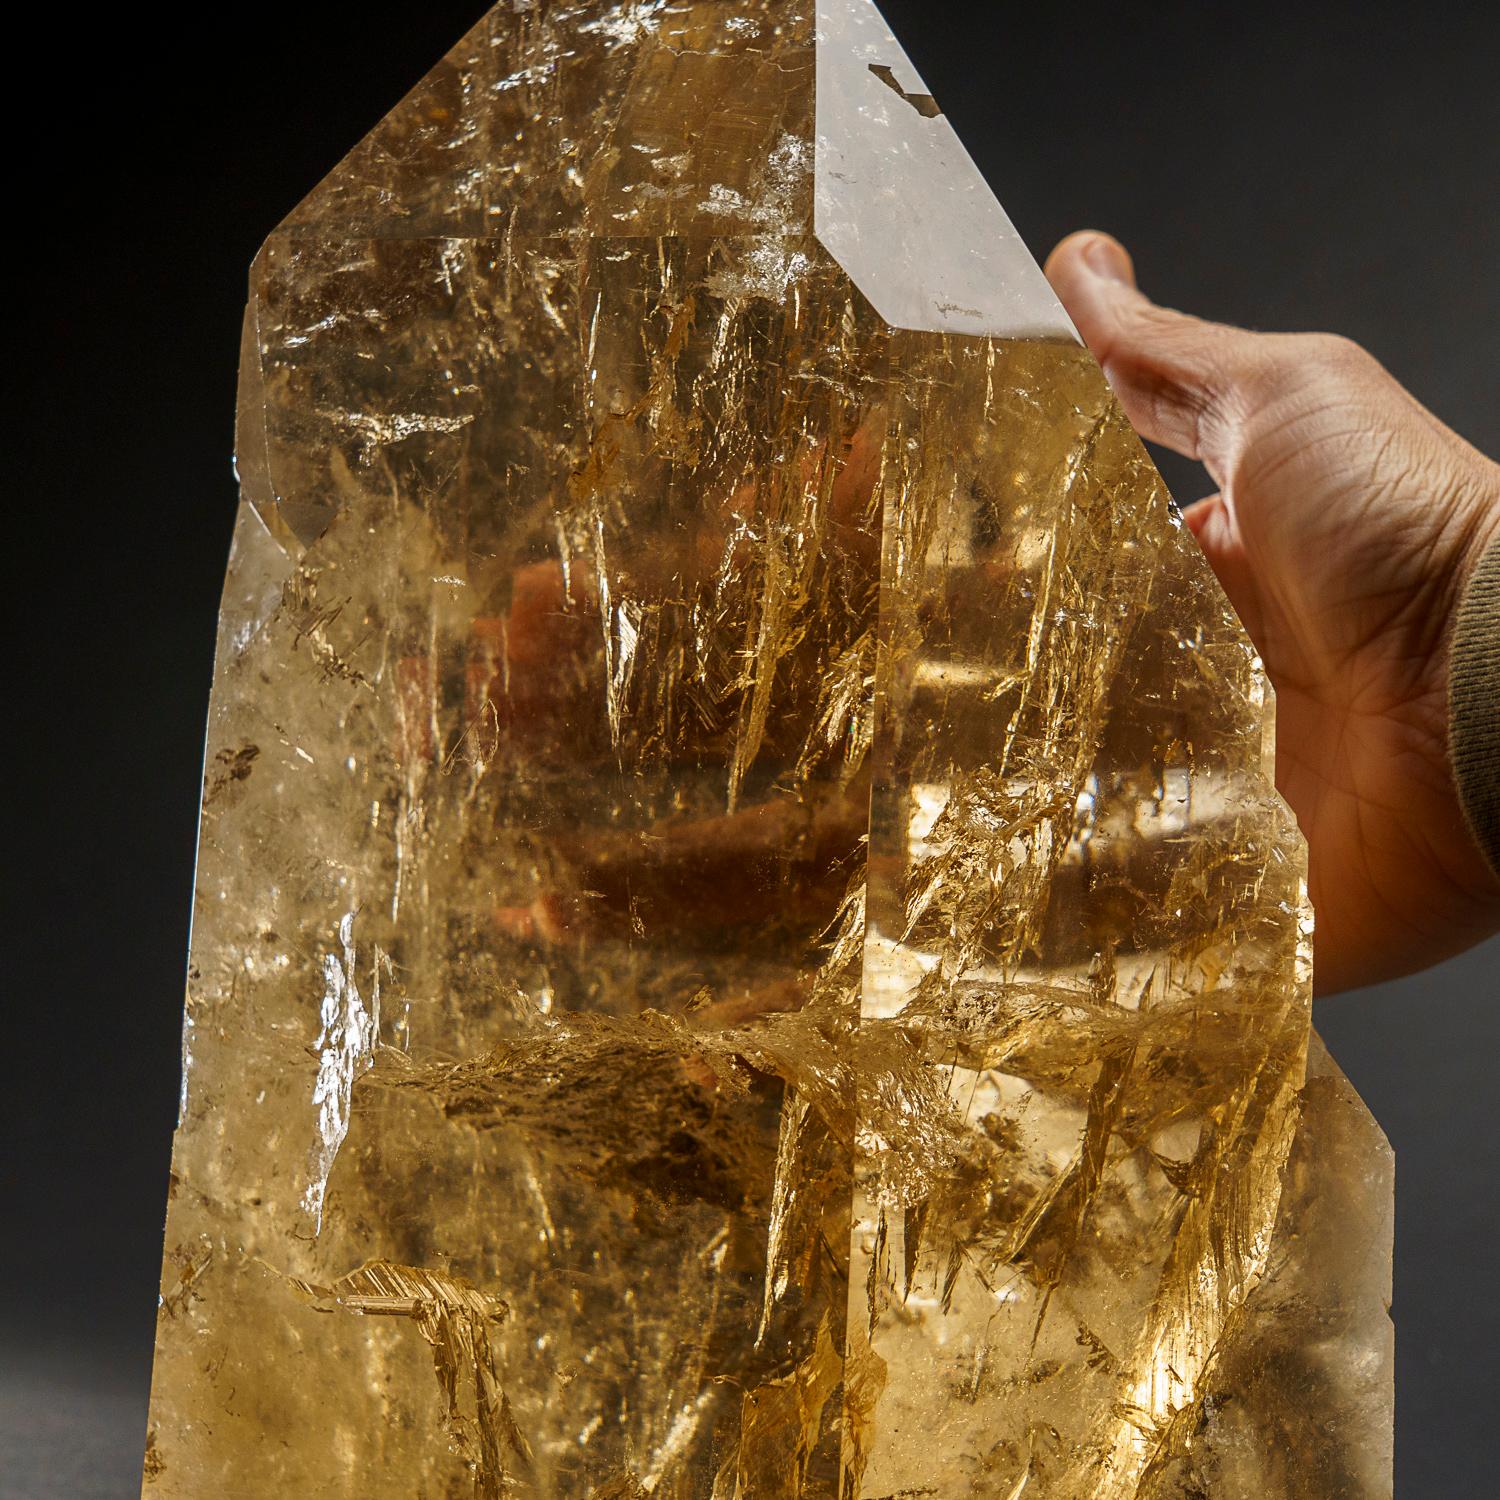  This exceptional Cathedral Smoky Quartz crystal point from Brazil, weighing in at 29 lbs, boasts museum-quality perfection with a flawlessly terminated face. Its remarkable luster and natural lightbrary smoky yellow color make it a world-renowned